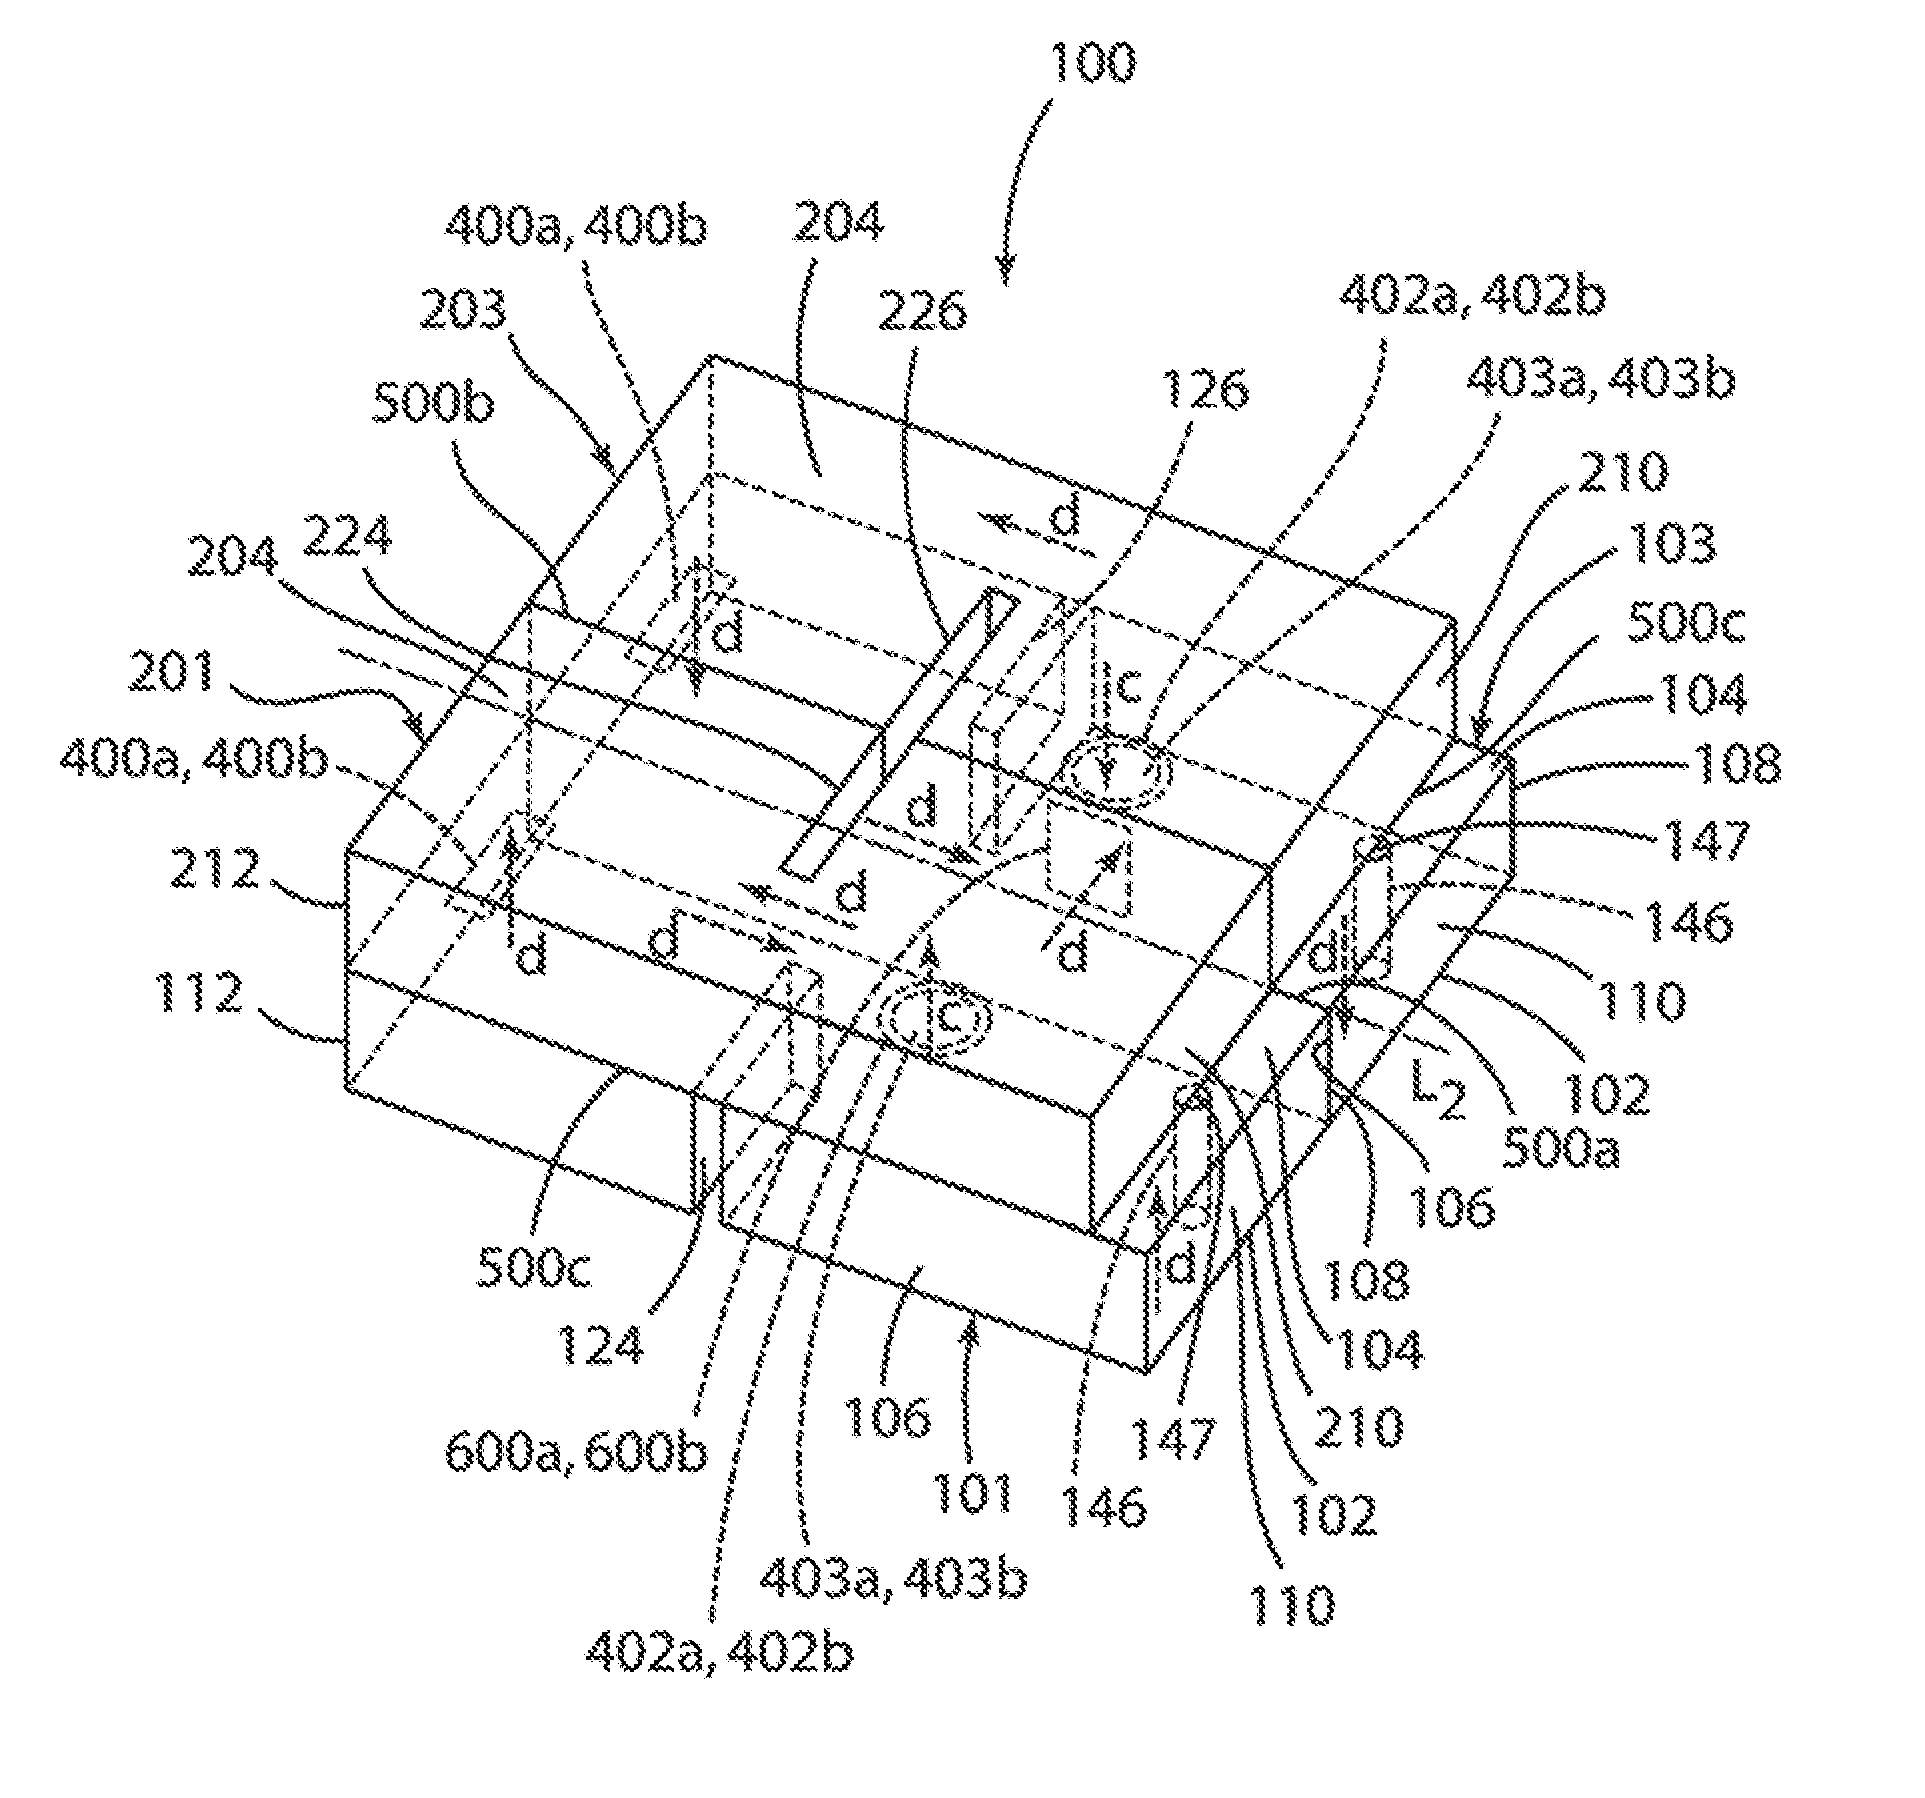 Dielectric Waveguide Filter with Direct Coupling and Alternative Cross-Coupling